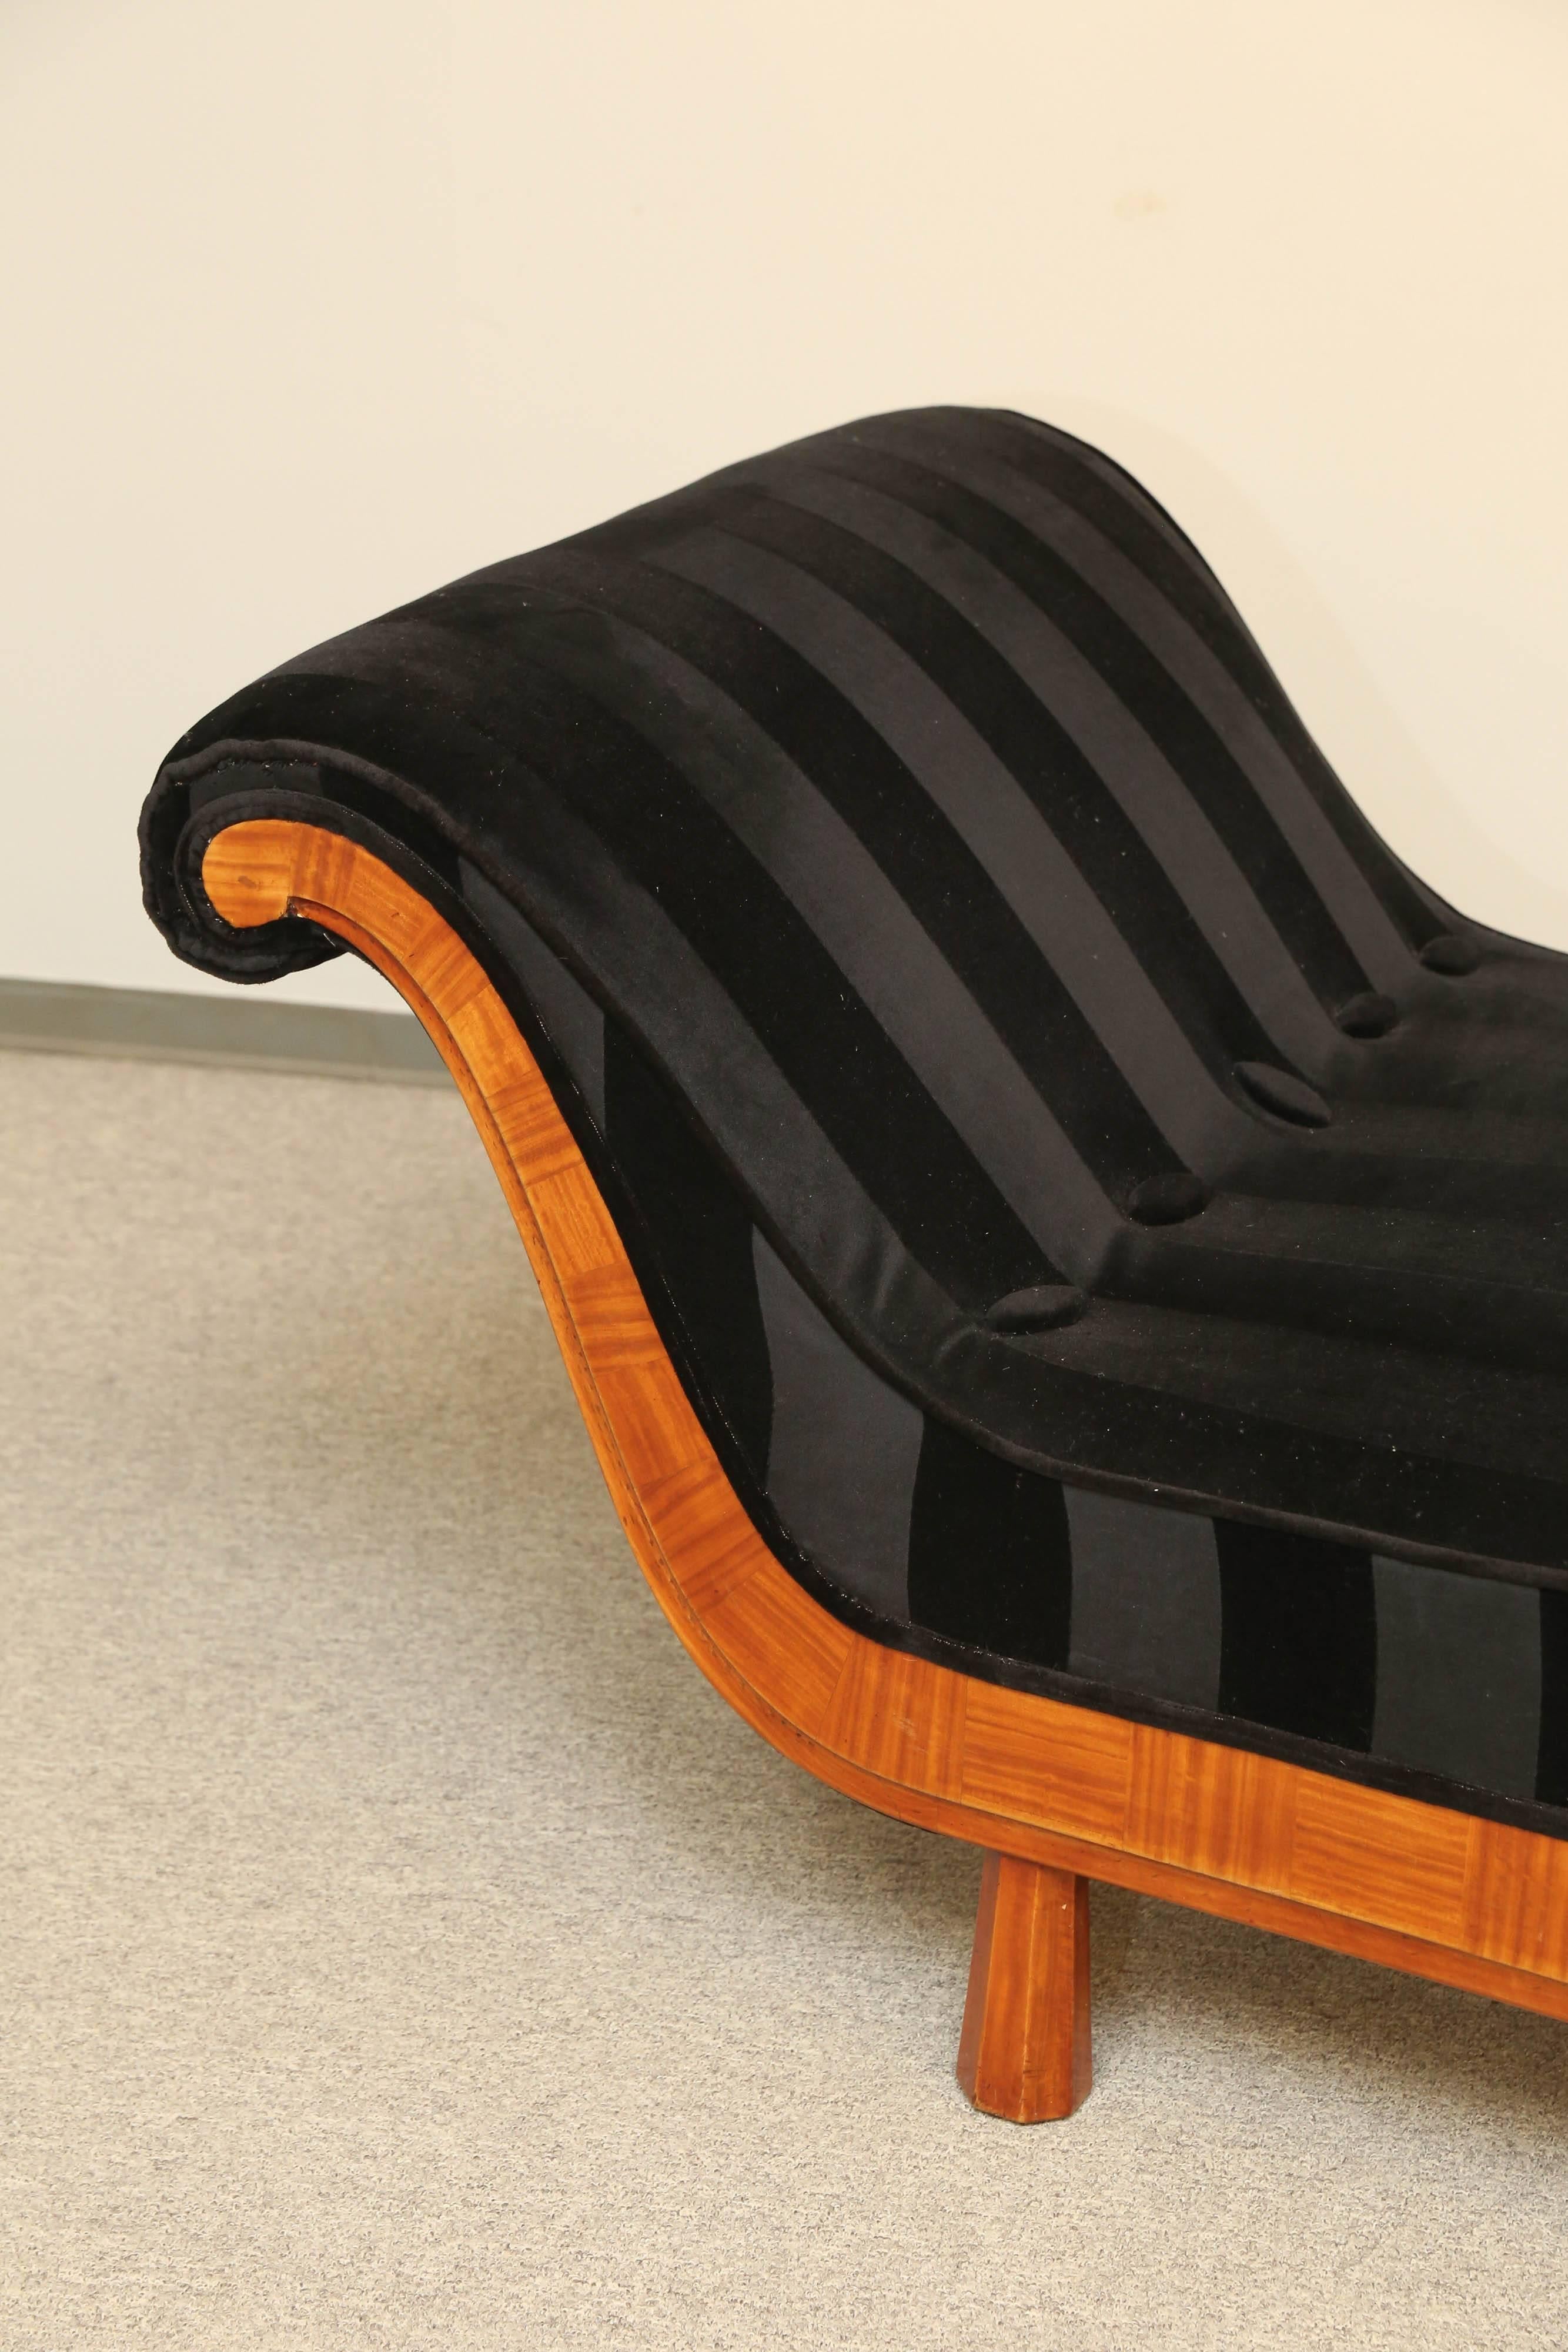 French Recamier with inlaid rosewood trim, resting on four shaped wood blocks. Covered in black on black stripes. Matching black bolster. Restored. 